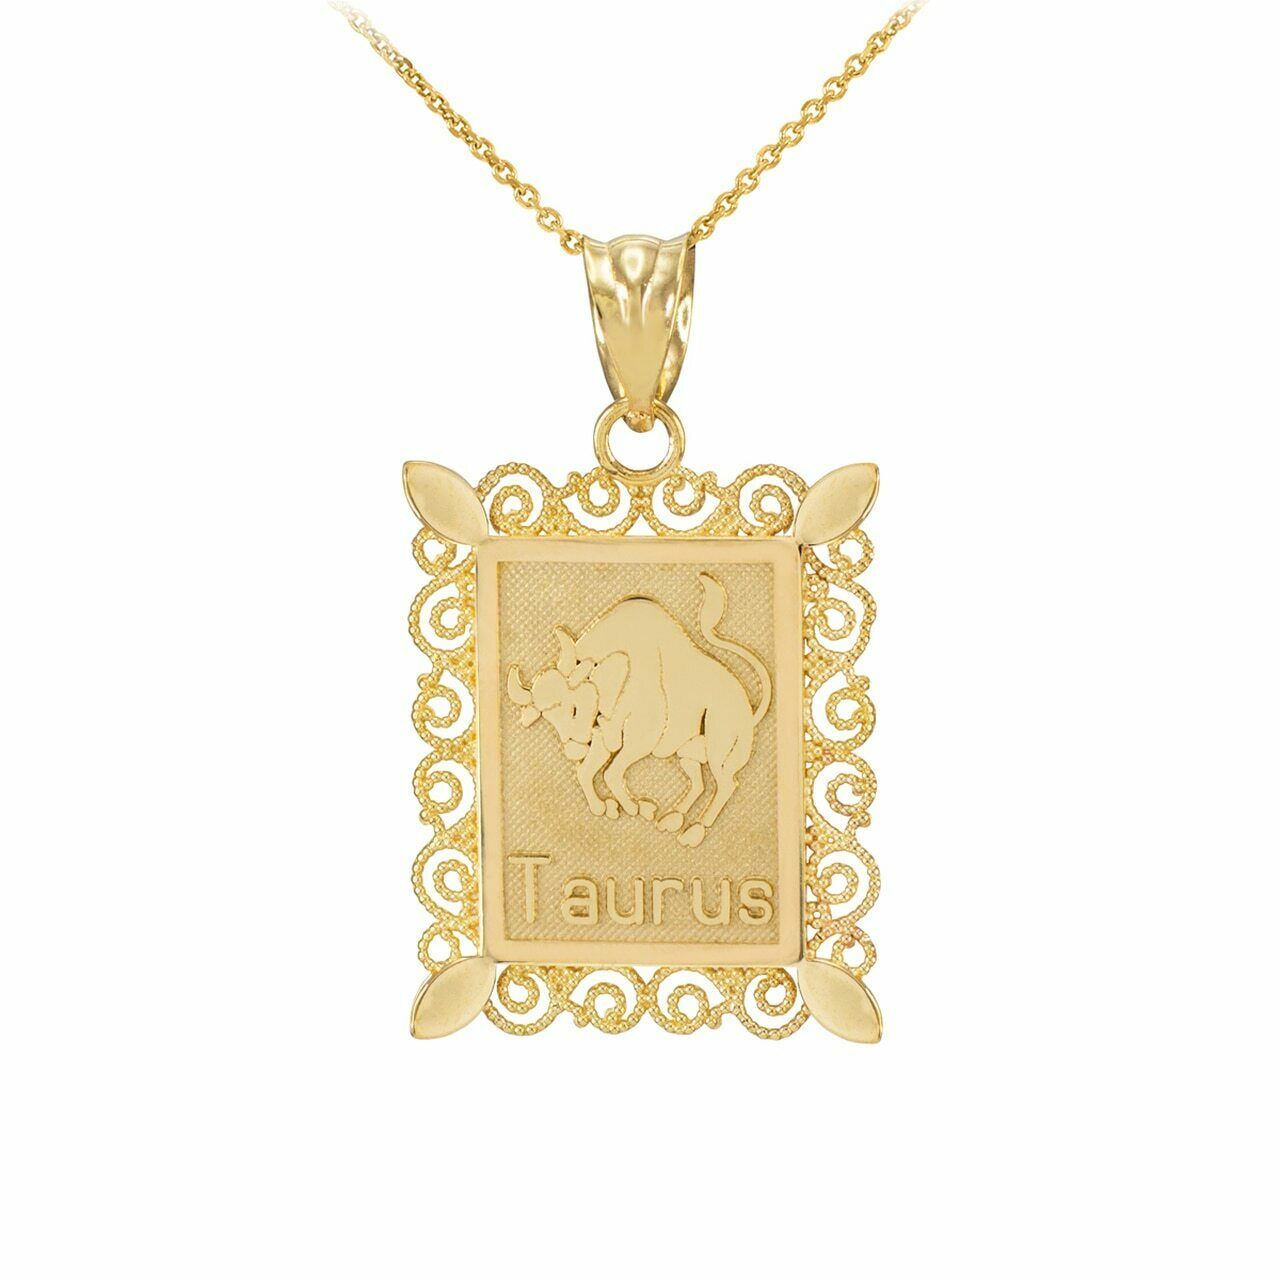 Primary image for 14k Solid Polished Gold Taurus Zodiac Sign Rectangular Pendant Necklace